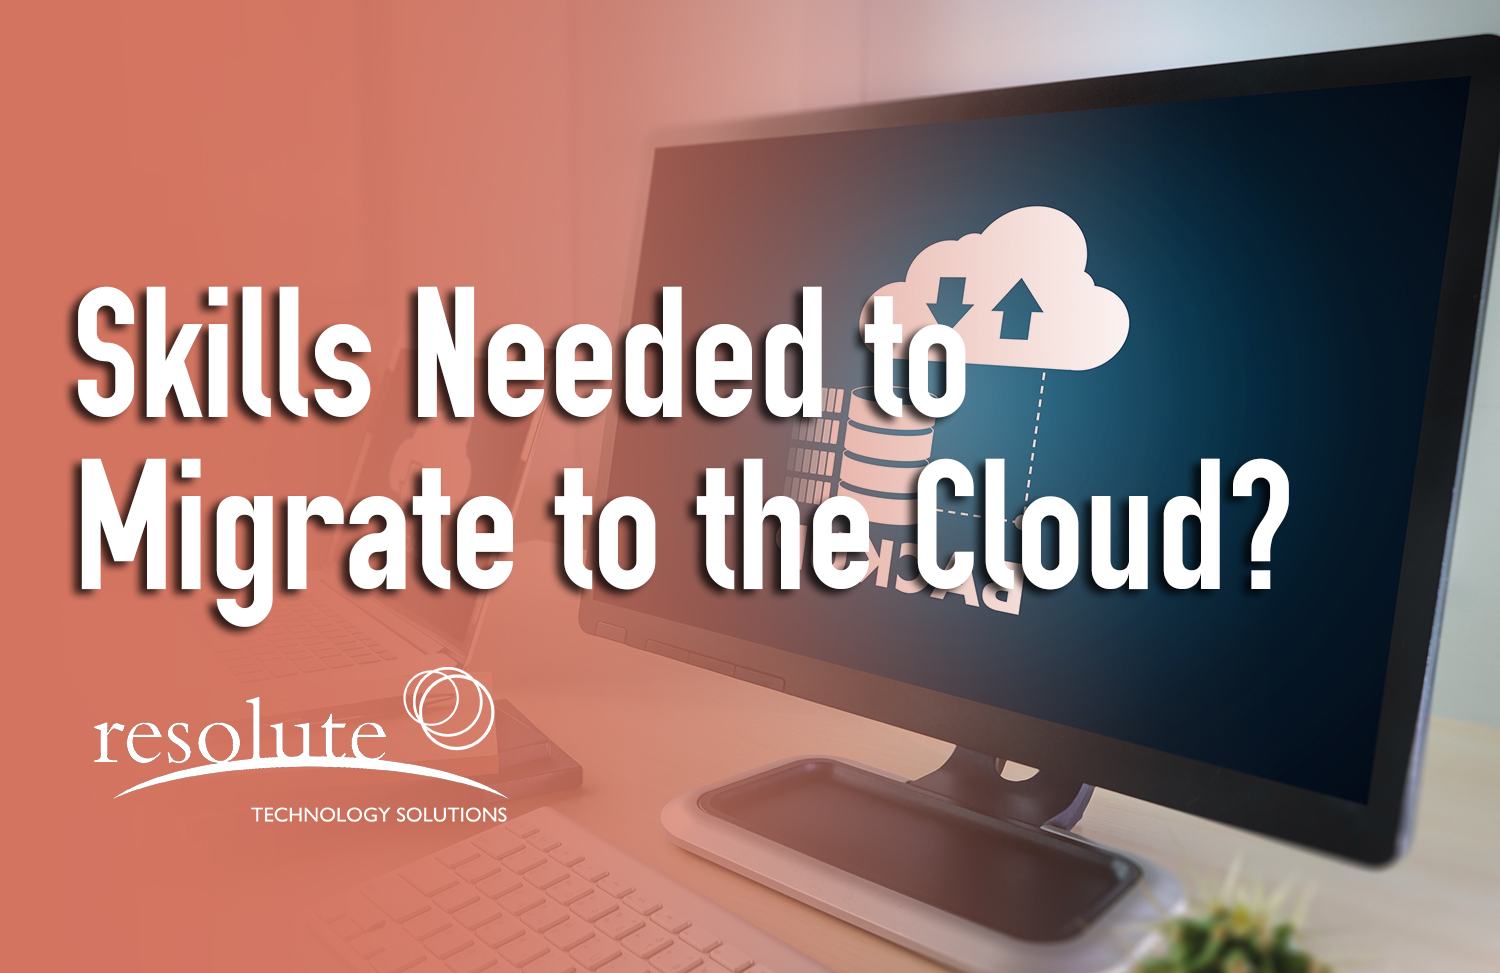 What Are The Technical Skills Needed to Migrate My Business to the Cloud? 